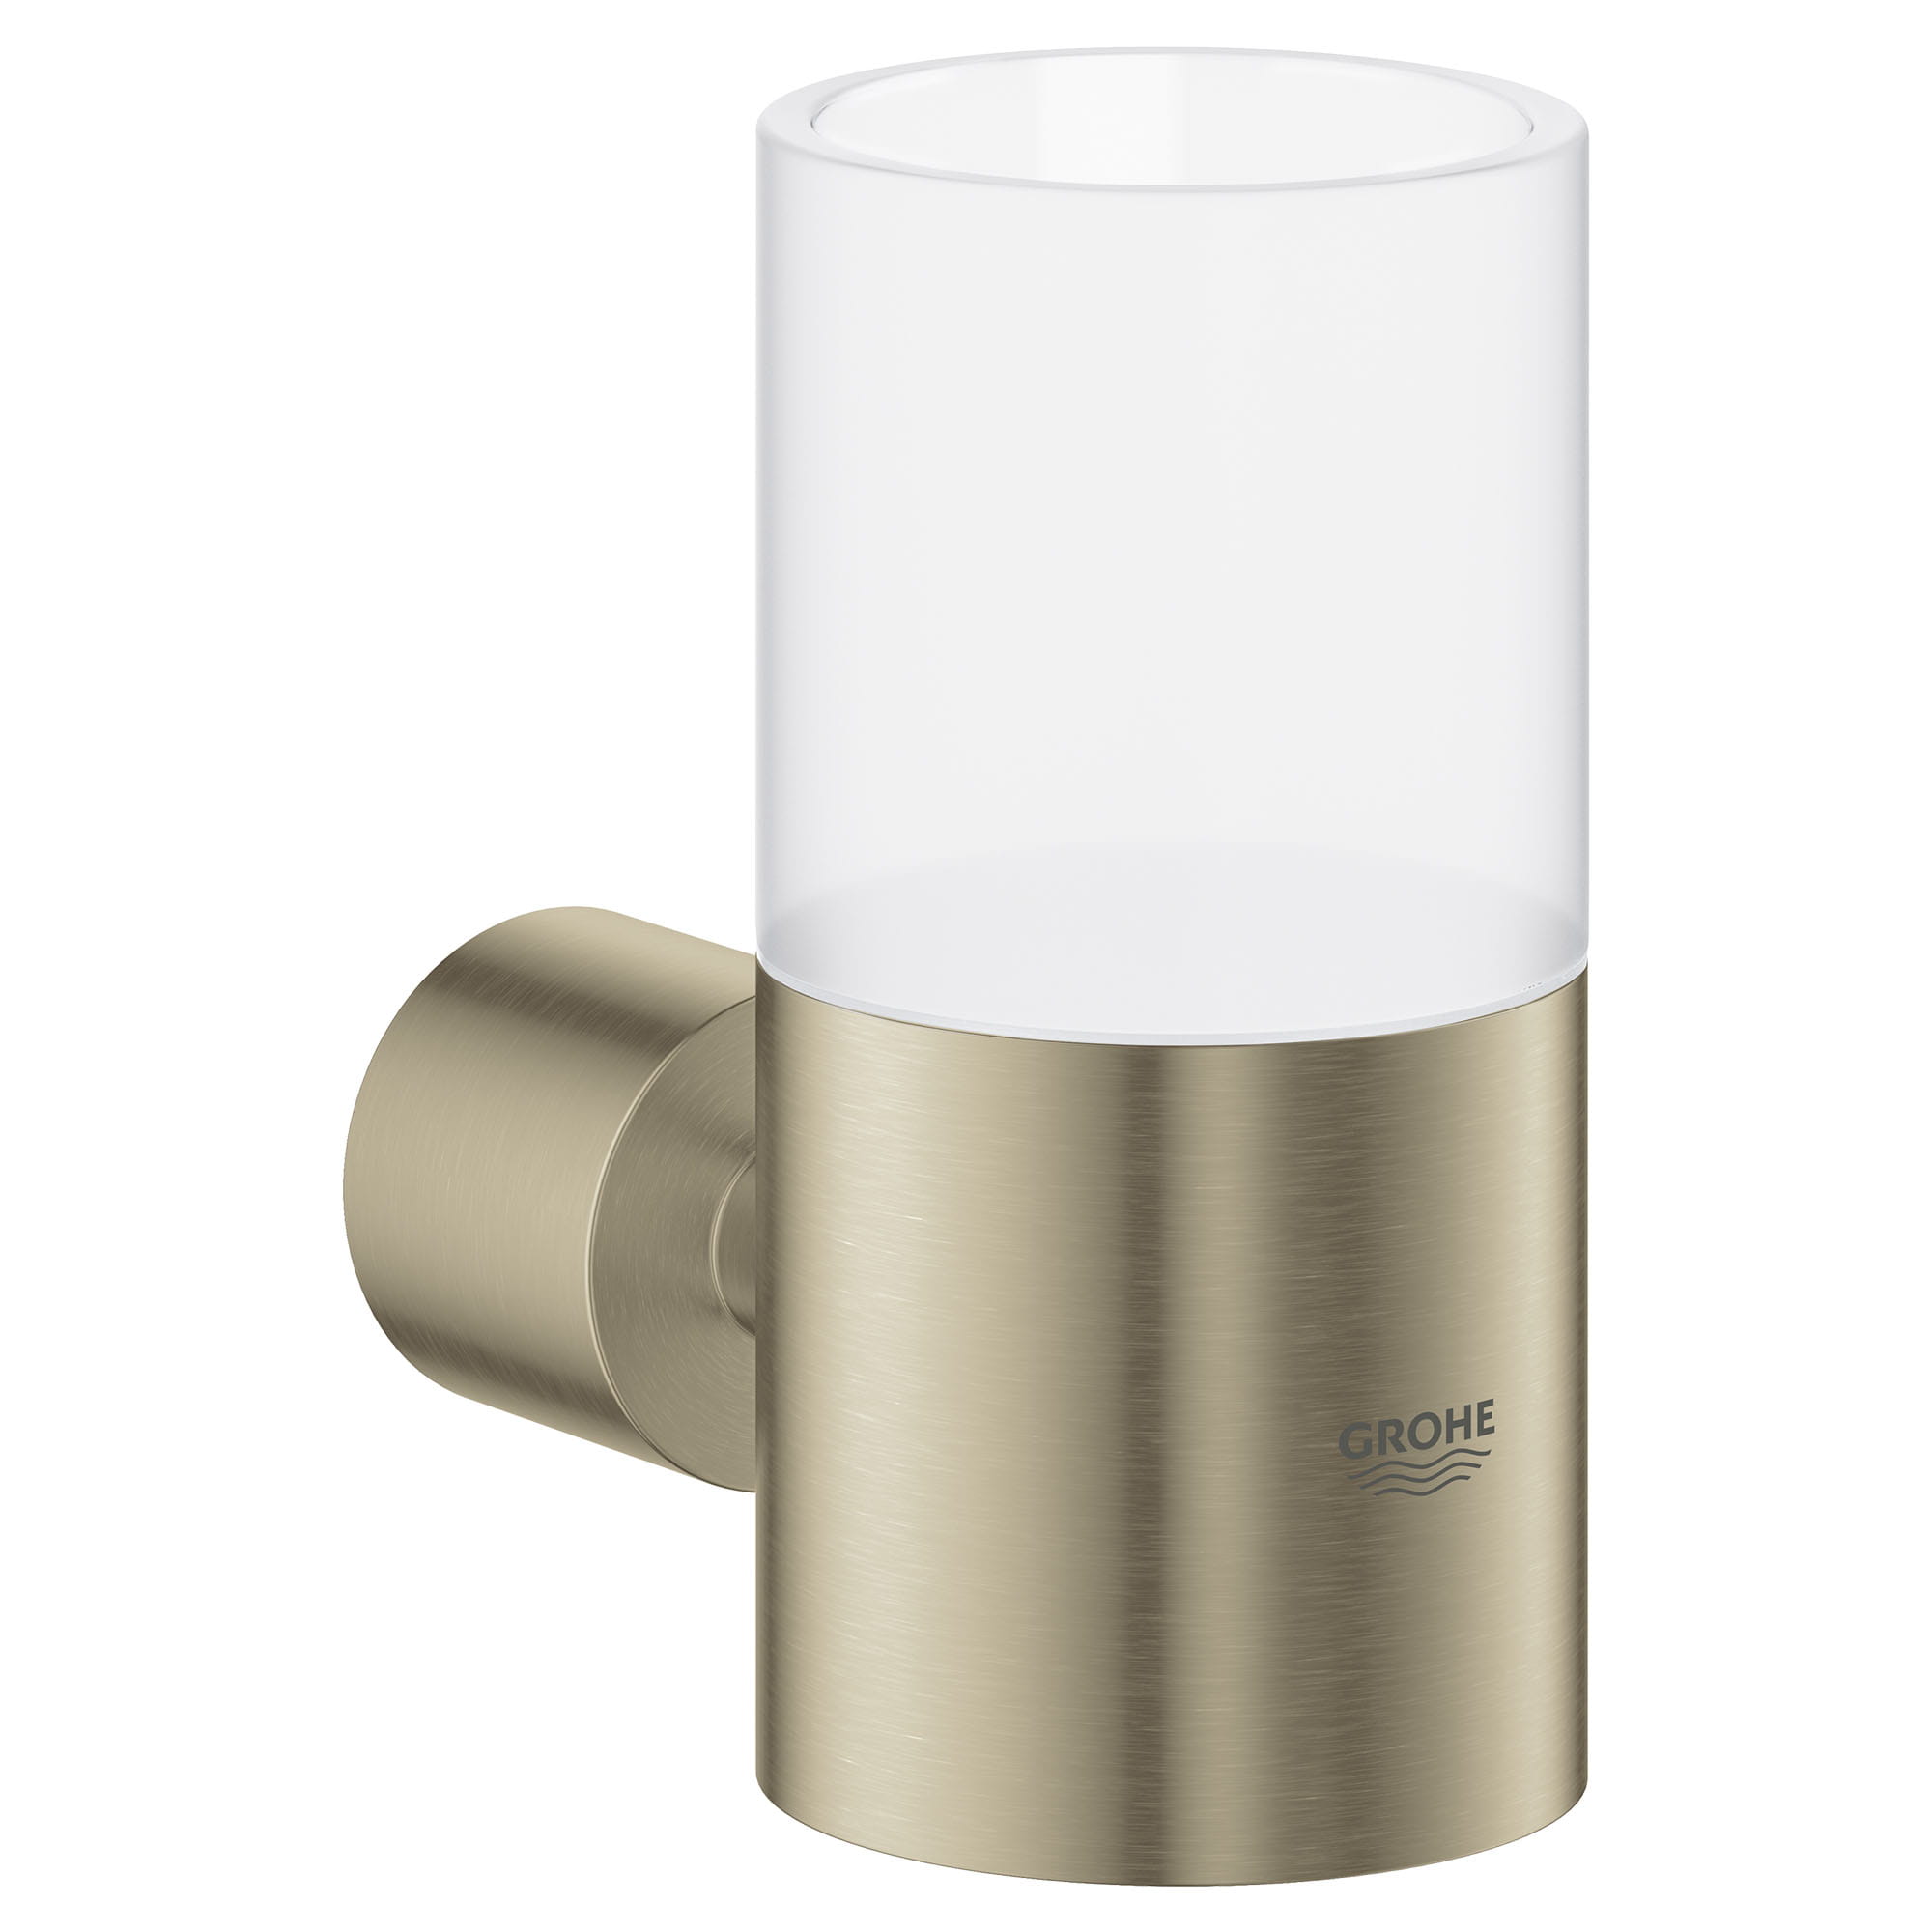 Holder For Glass Soap Dish Or Soap Dispenser GROHE BRUSHED NICKEL